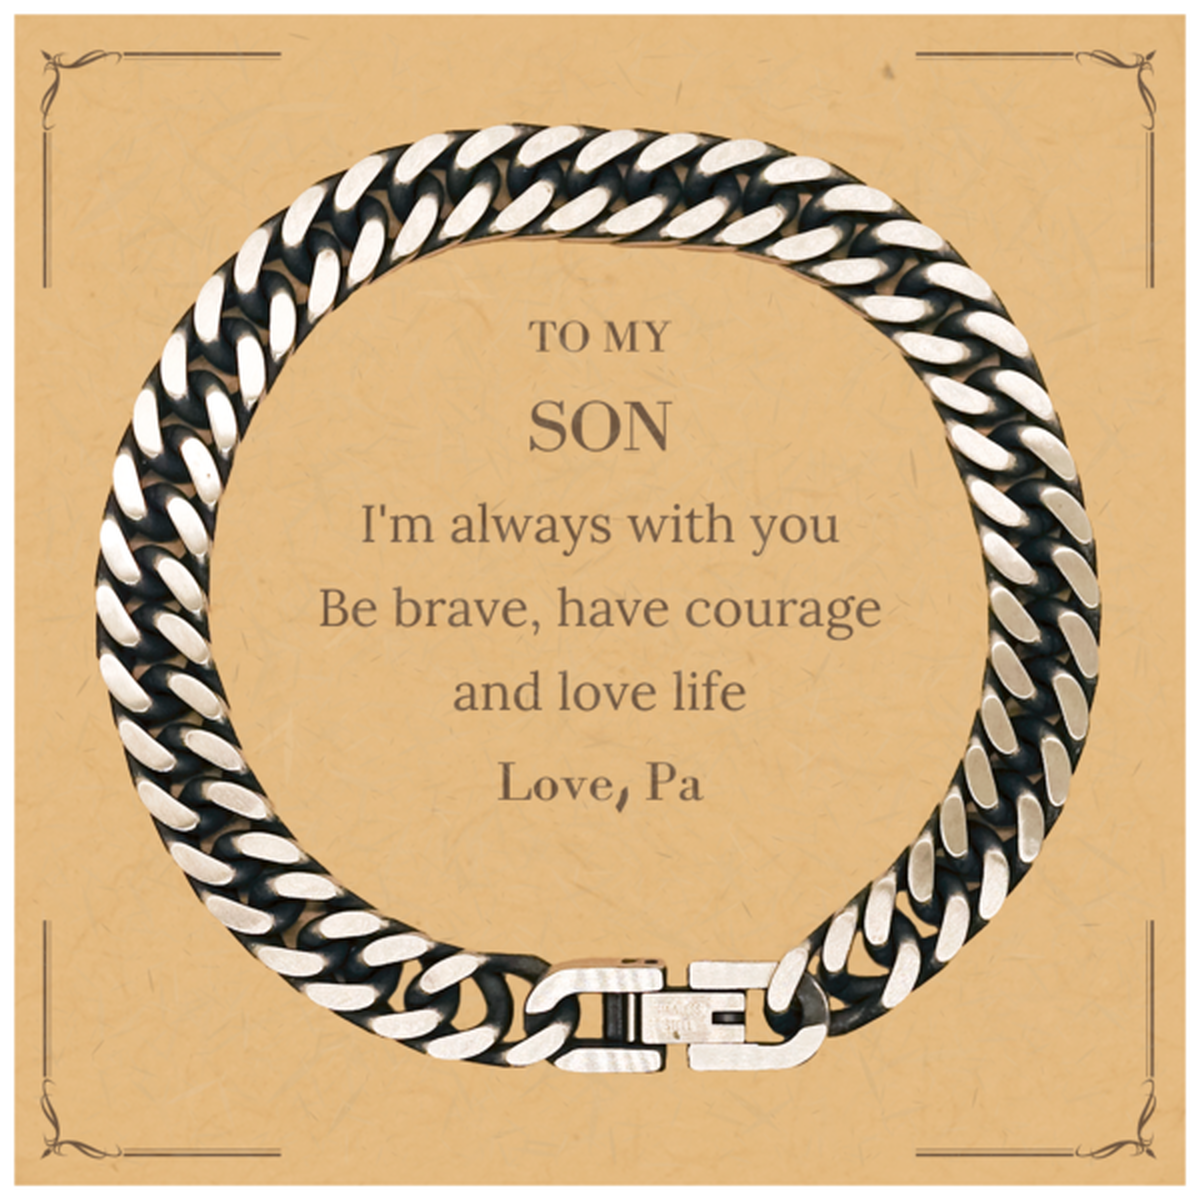 To My Son Gifts from Pa, Unique Cuban Link Chain Bracelet Inspirational Christmas Birthday Graduation Gifts for Son I'm always with you. Be brave, have courage and love life. Love, Pa